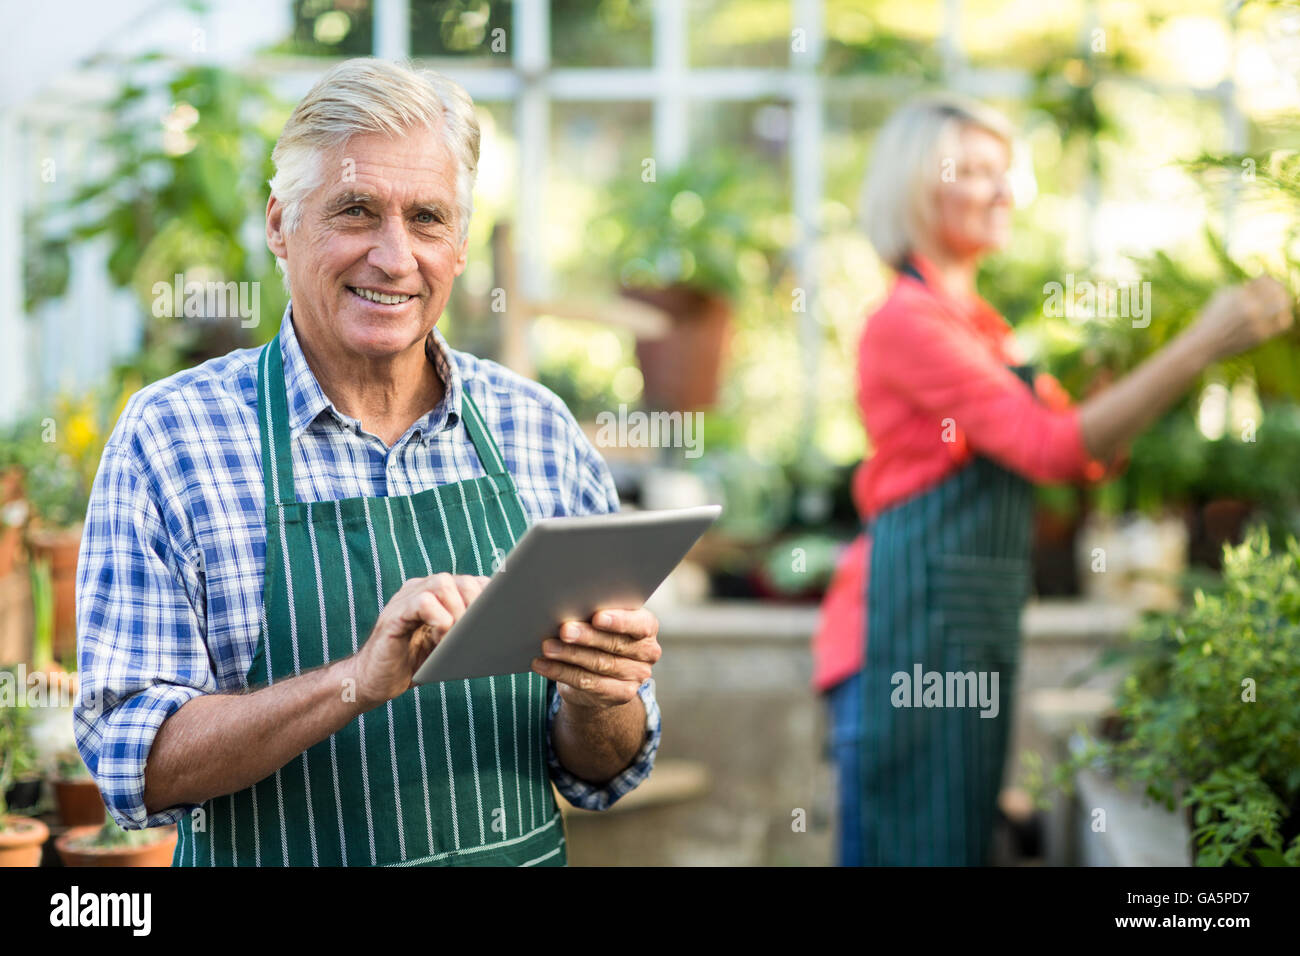 Senior man using digital tablet while woman working at greenhouse Stock Photo